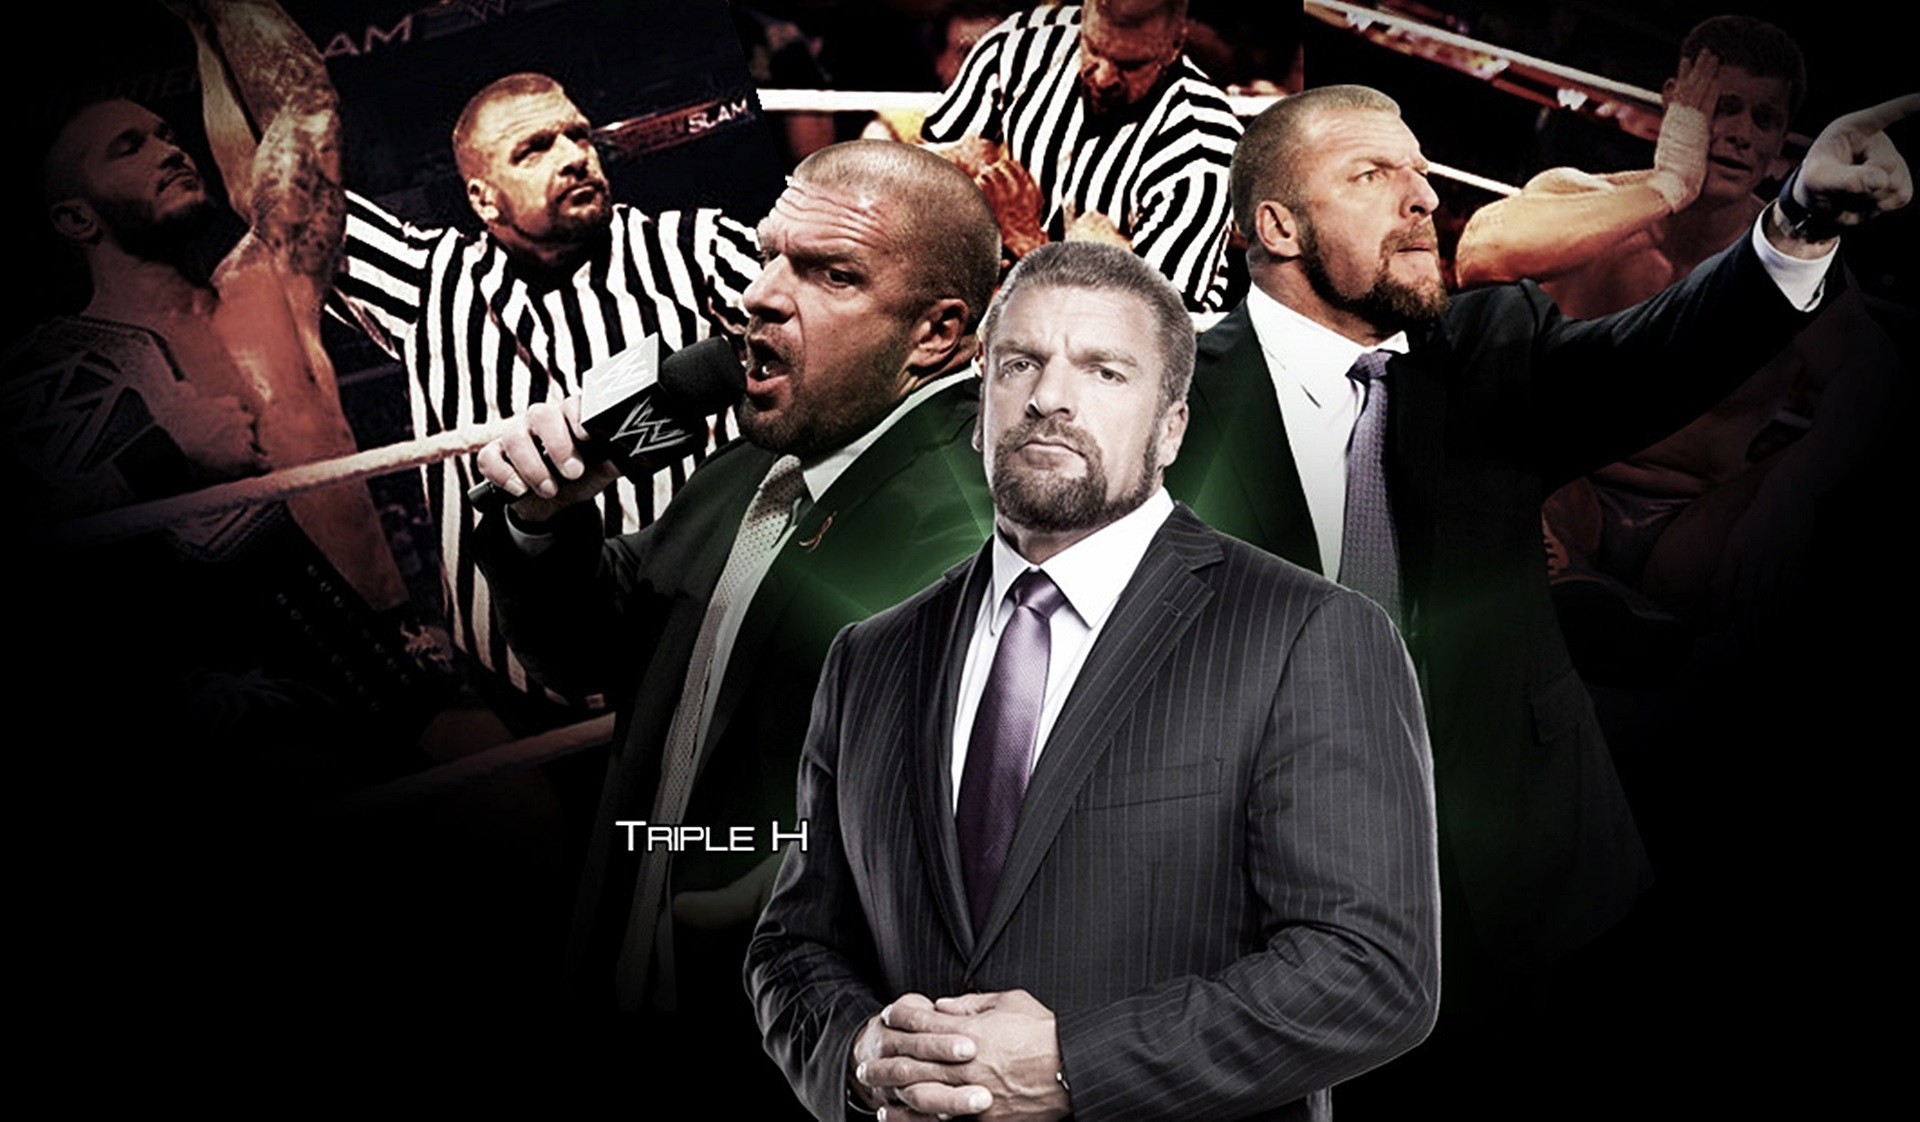 1920x1122 Triple H is such a great wrestler or superstar in the WWE history. He is  known as “The Game” in the ring. HBK and Triple H are the best friends in  WWE.